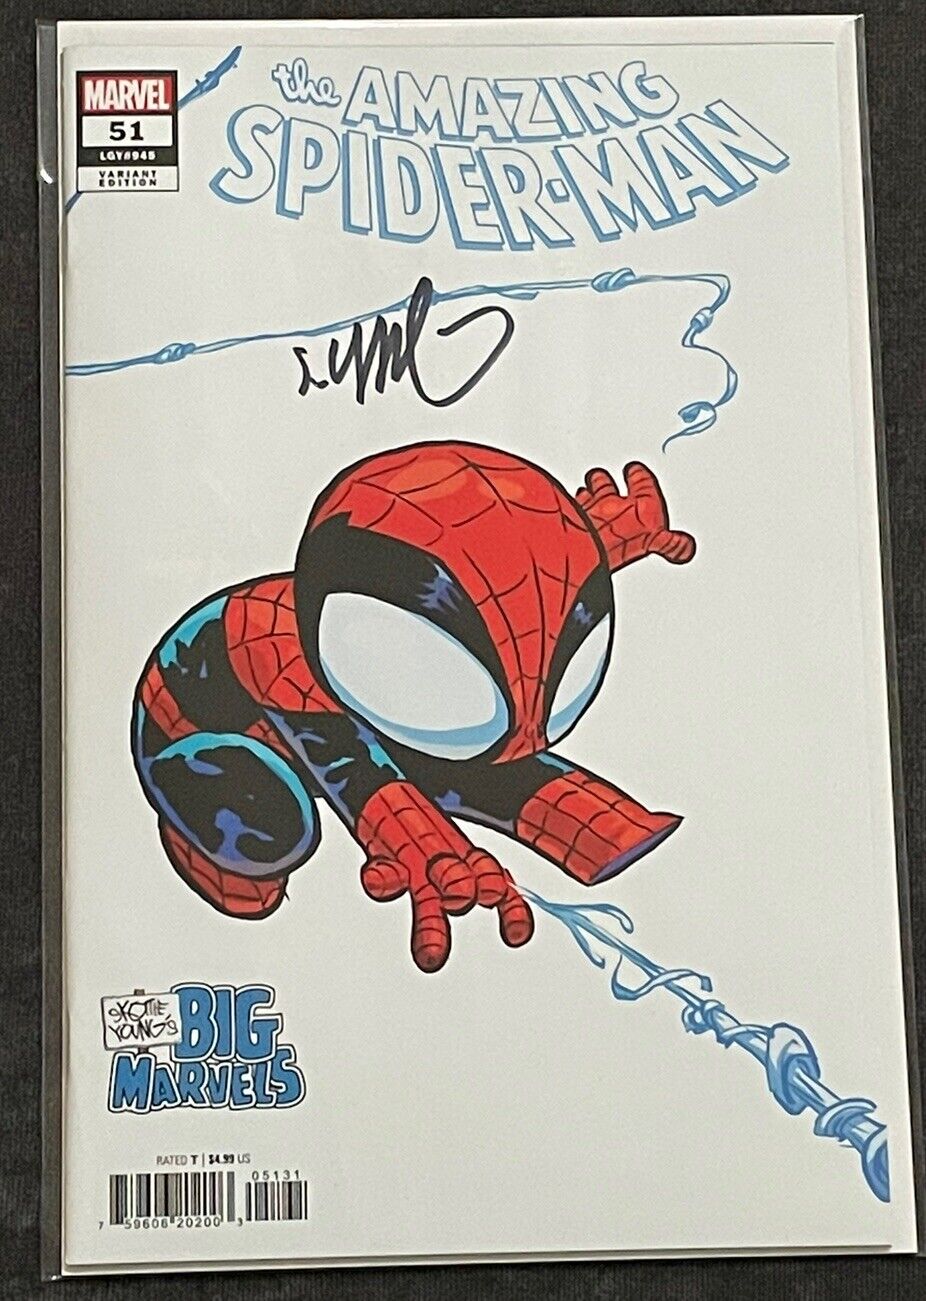 Amazing Spider-Man #51 SKOTTIE YOUNG Big Marvels Variant SIGNED with COA